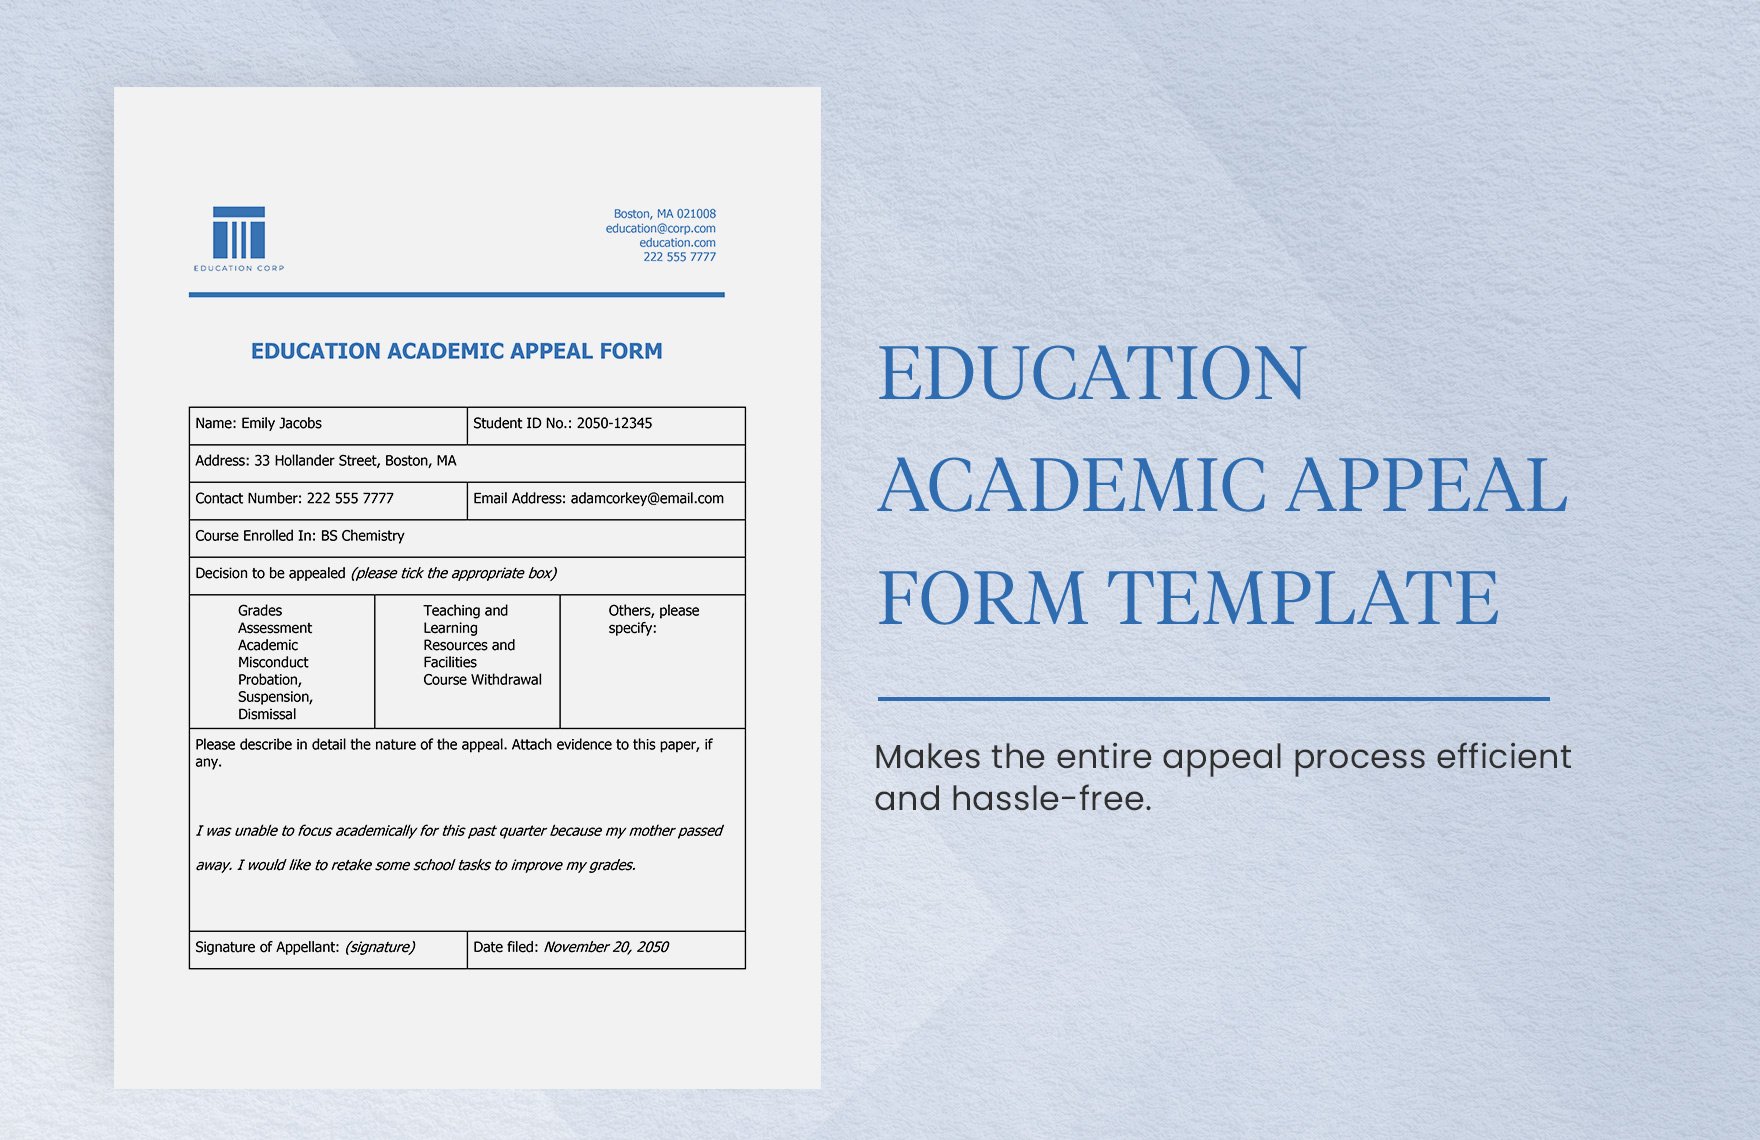 Education Academic Appeal Form Template